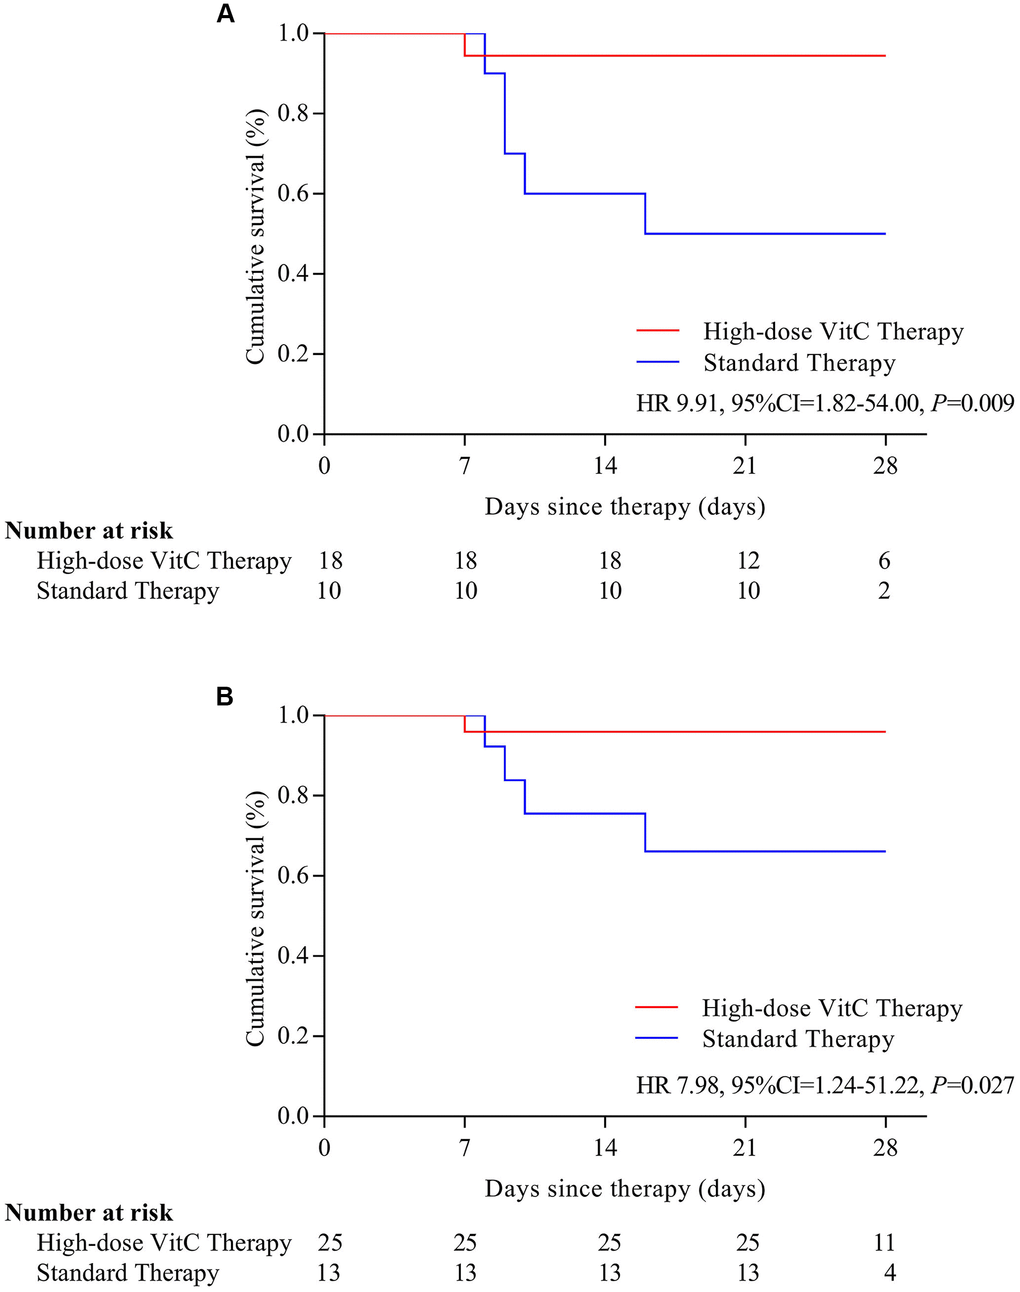 Survival by severe and critical disease (A) and age > 60 years old (B). Survival is stratified by disease severity at baseline and by age. (A) In patients with severe or critical disease, the risk of mortality was lower for patients with high-dose vitamin C than that with standard therapy (HR= 9.91, 95% CI, 1.82-54.00); (B) In patients with age > 60, the risk of mortality was lower for patients with high-dose vitamin C than that with standard therapy (HR=7.98, 95% CI, 1.24-51.22). VitC: vitamin C.